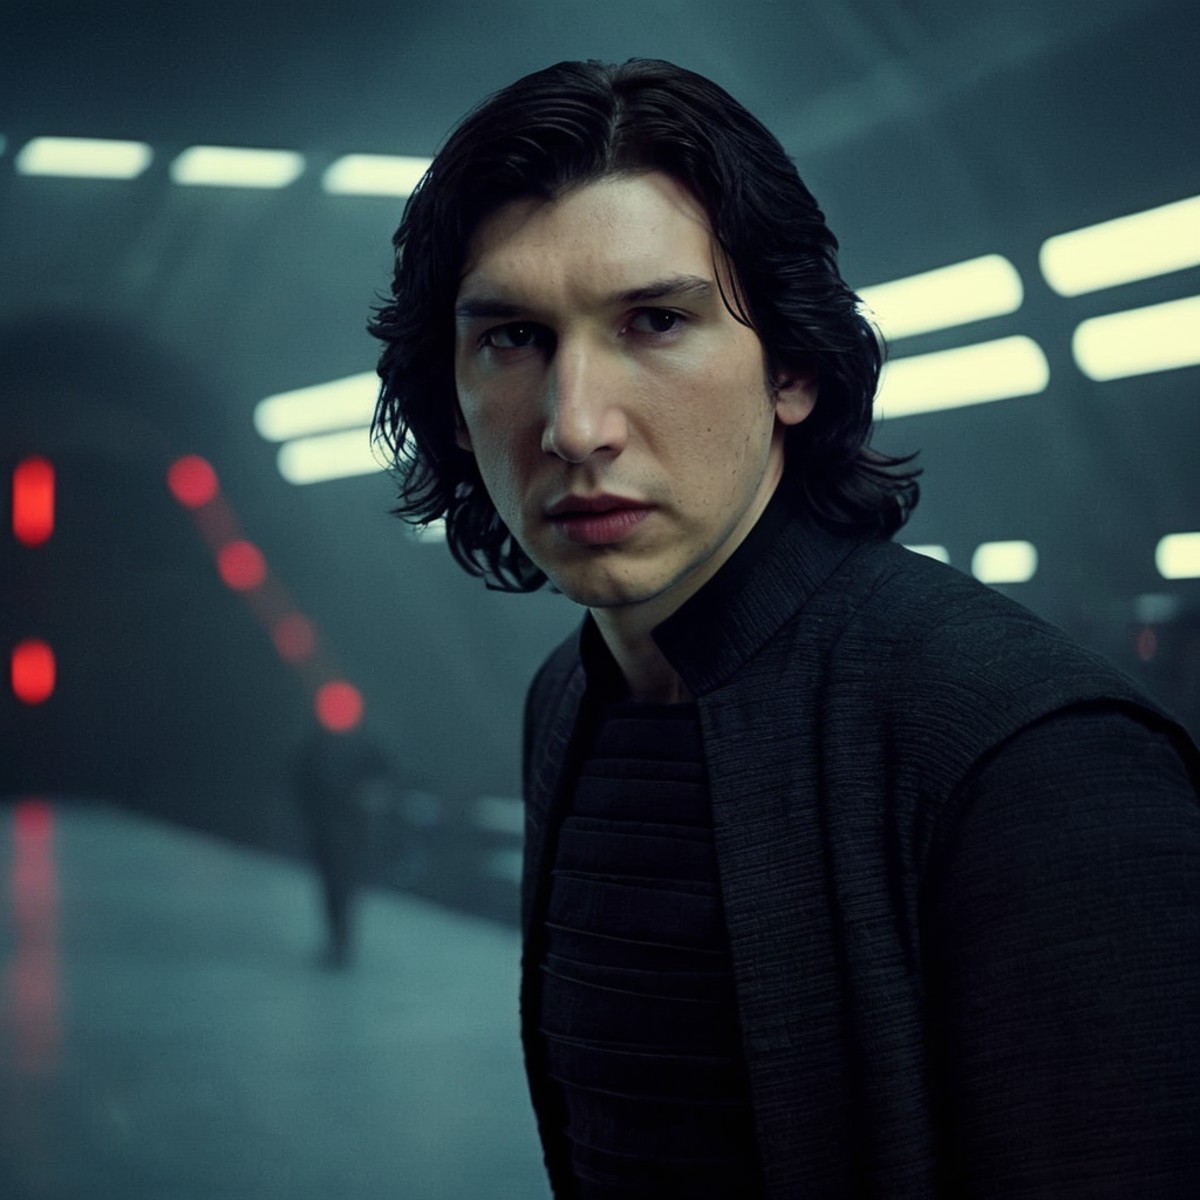 cinematic film still of  <lora:Ben Solo:1>
Ben Solo a man with long hair and a black shirt in star wars universe, shallow ...